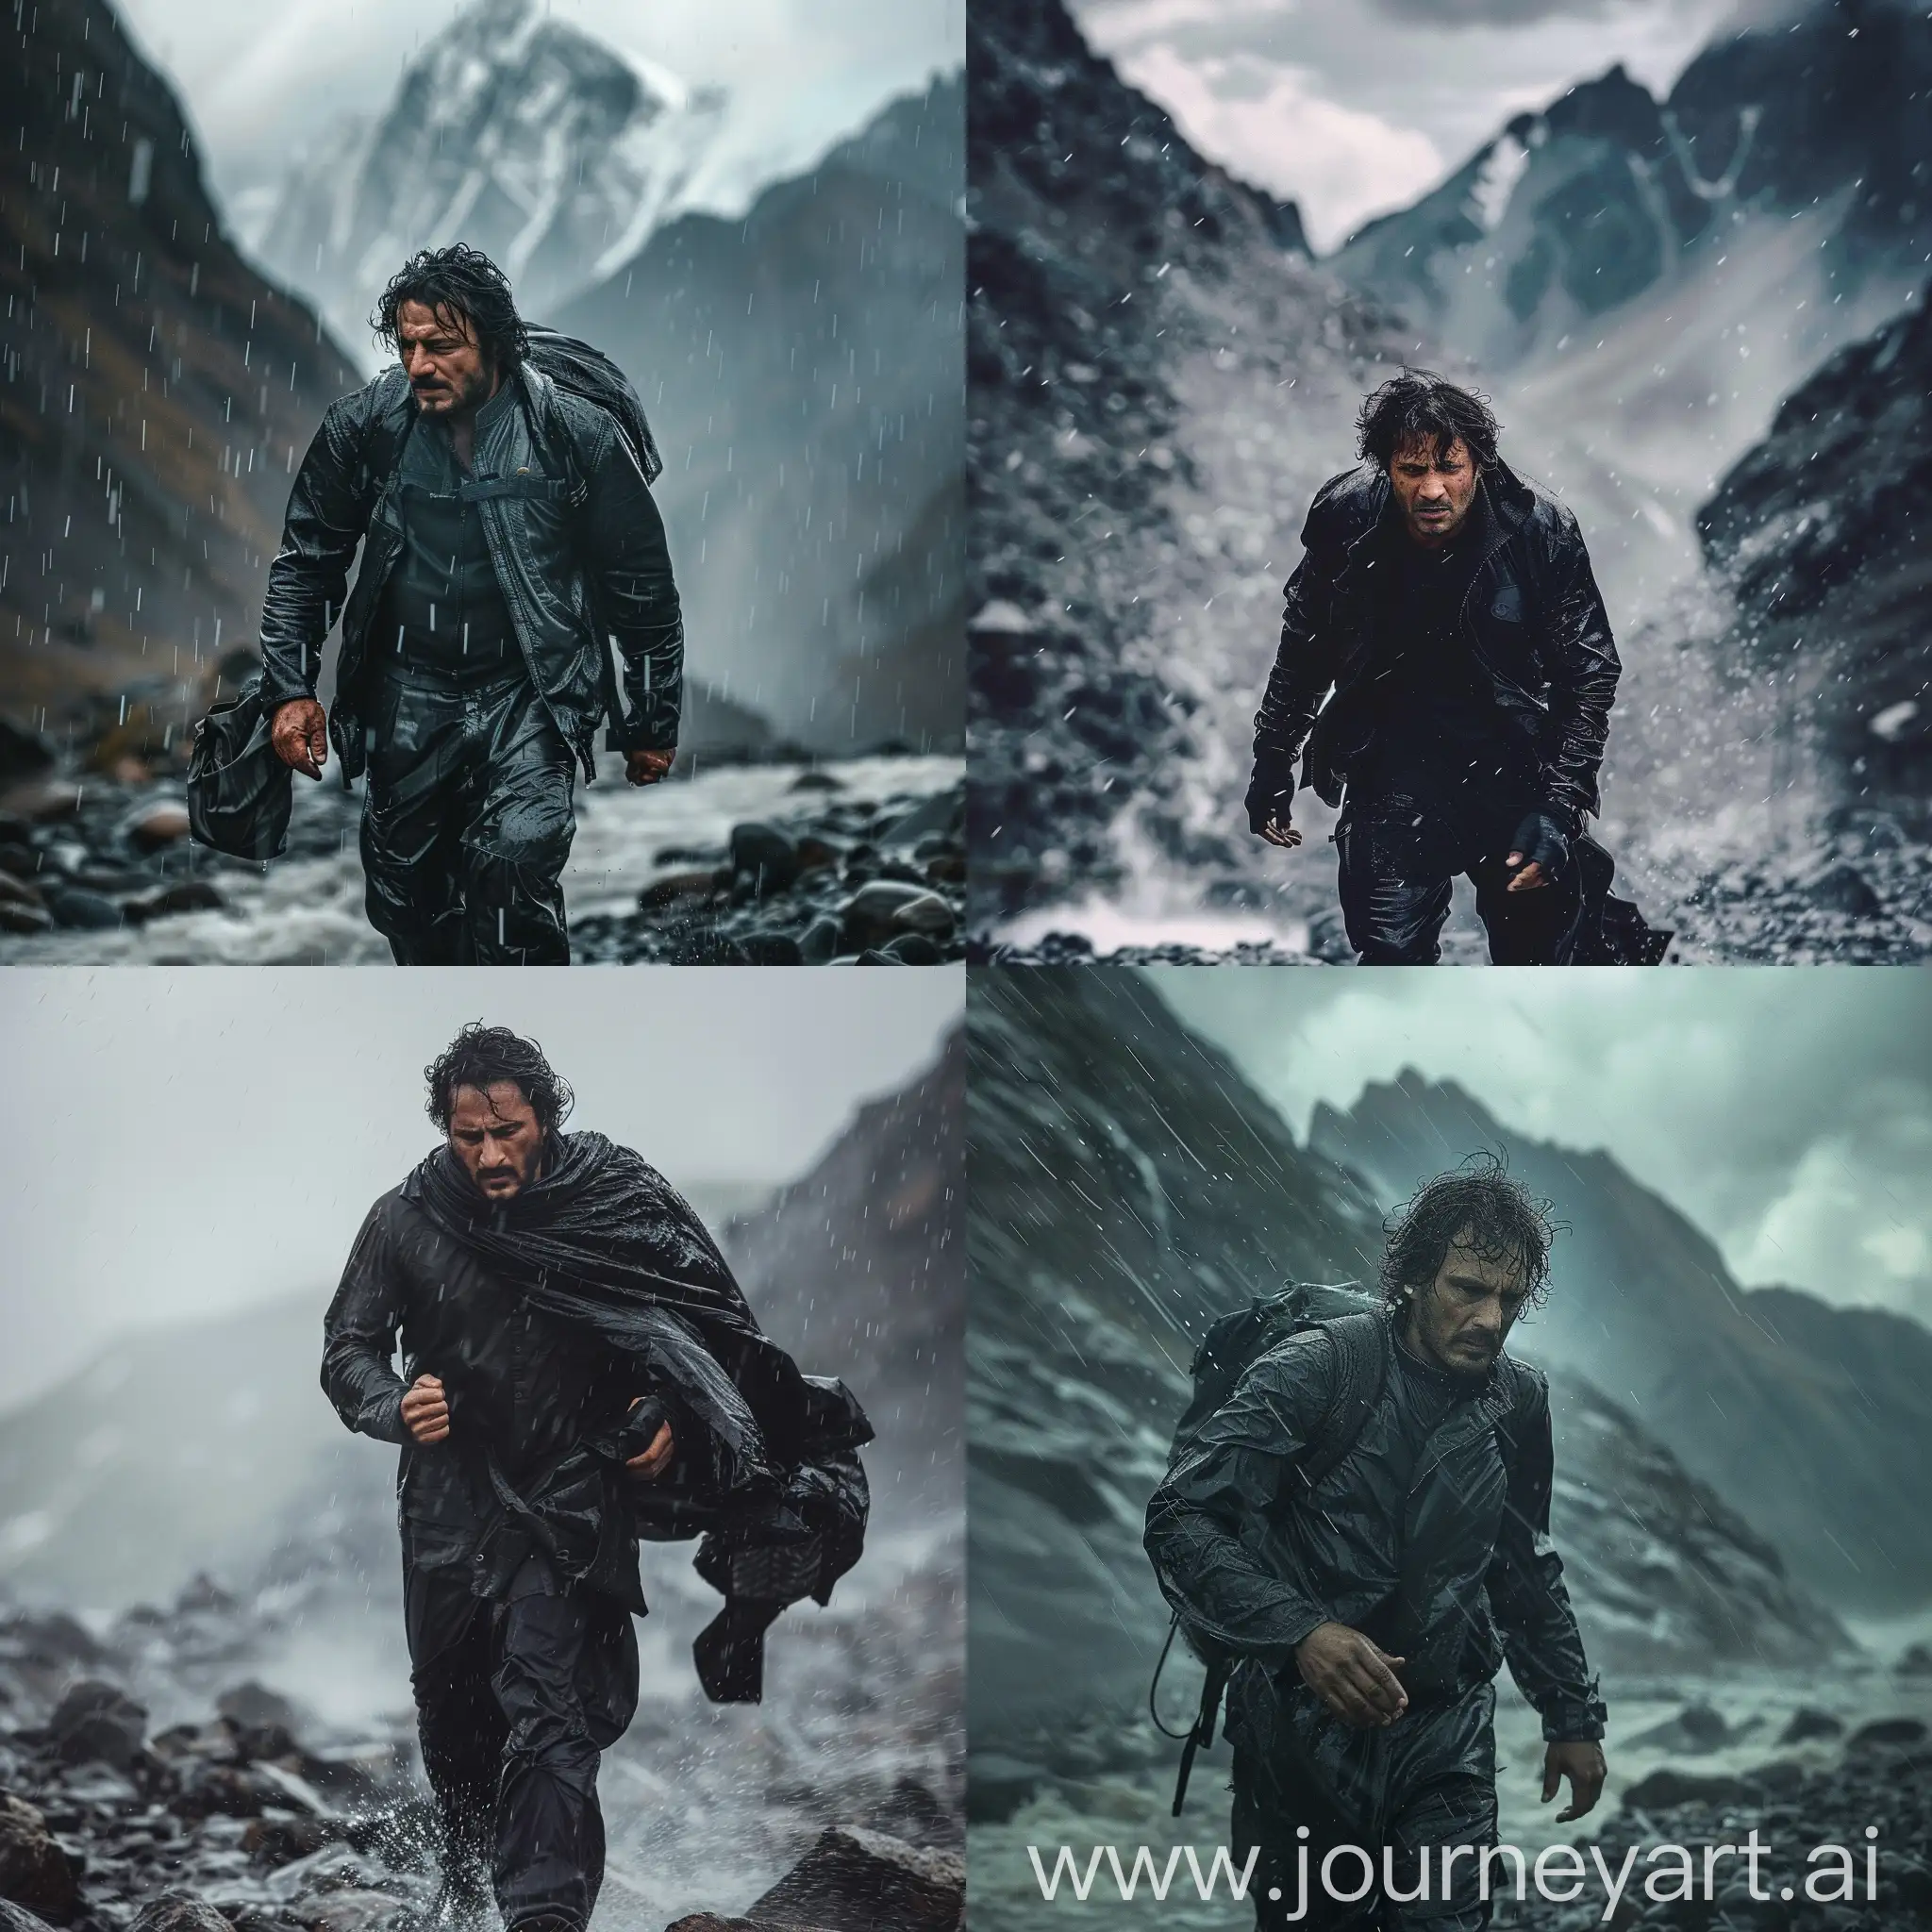 imran kahn battling his way in mountains, storm, rain and winds
